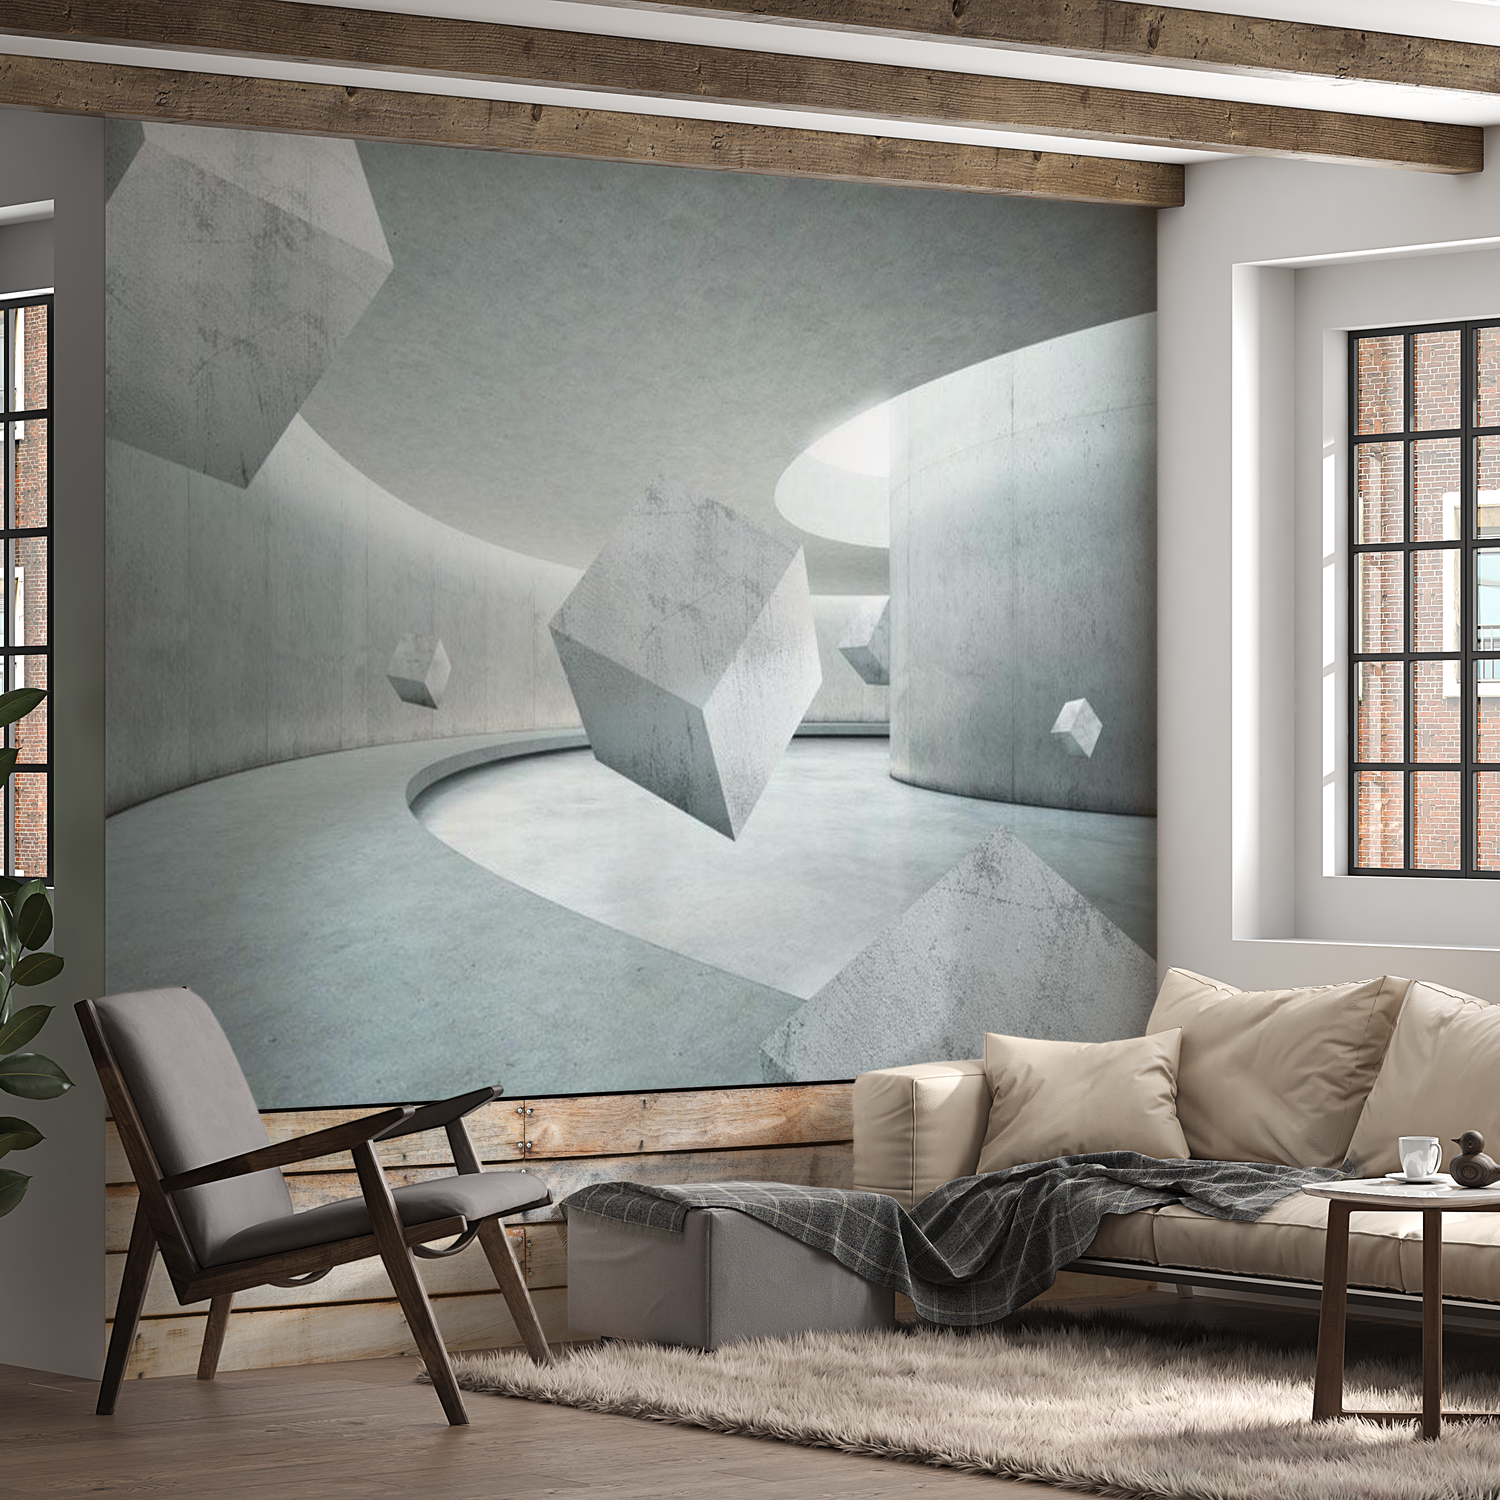 3D Illusion Wallpaper Wall Mural - Geometry Of The Cube 39"Wx27"H